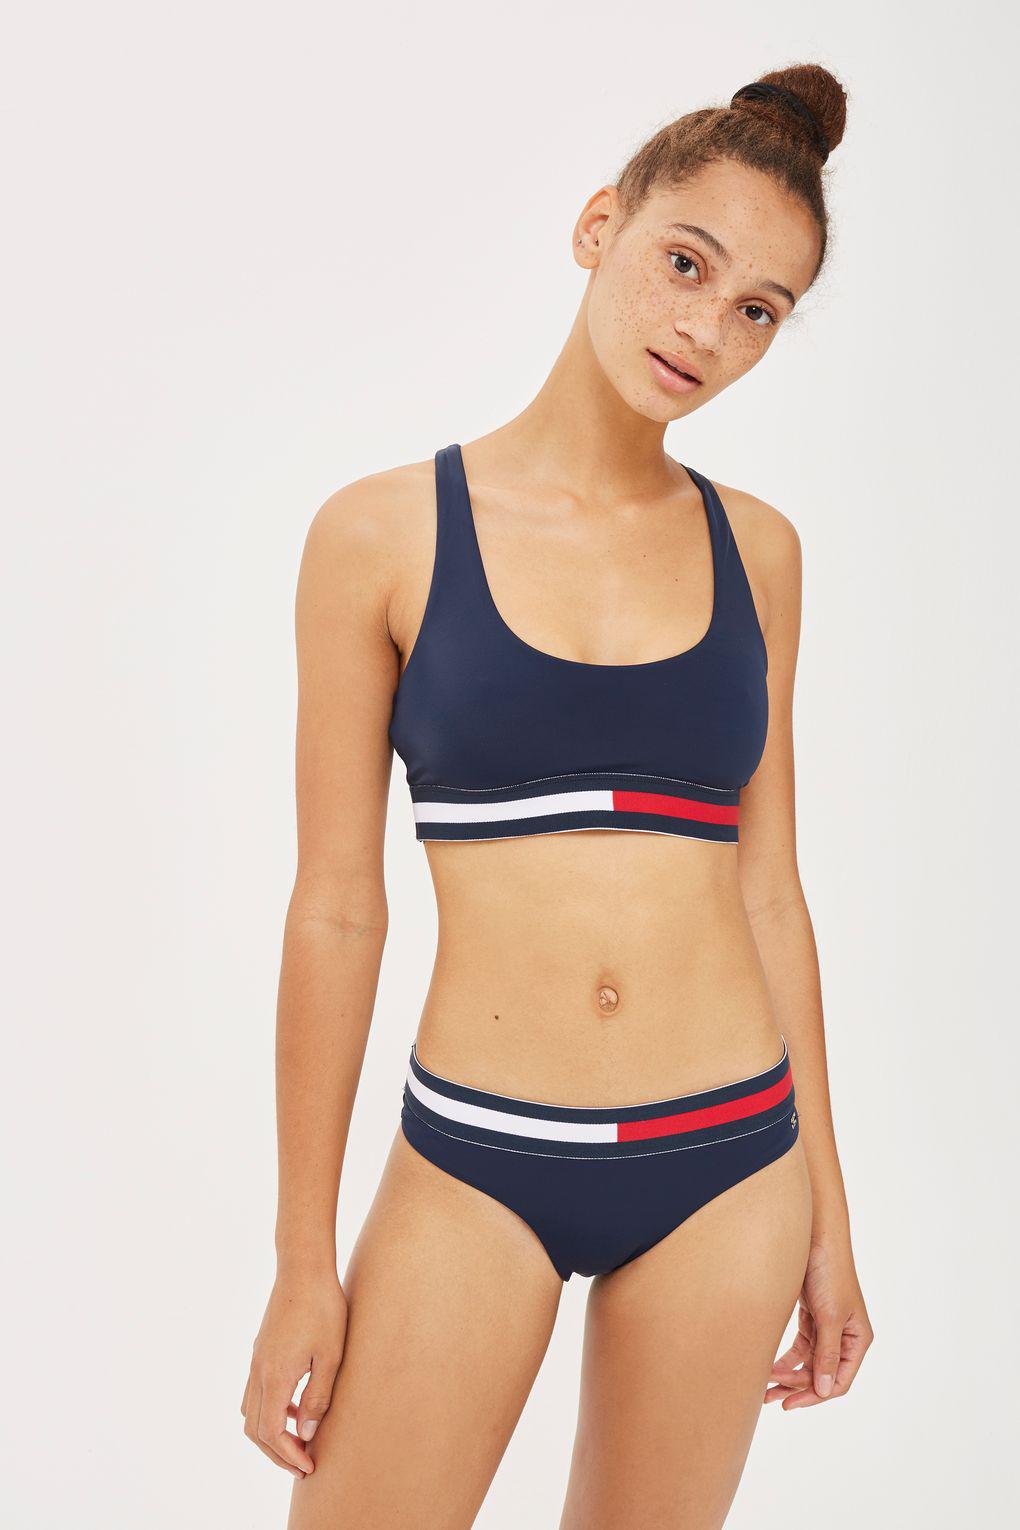 tommy hilfiger cross bikini Cheaper Retail Price> Buy Clothing, Accessories lifestyle products for women & -